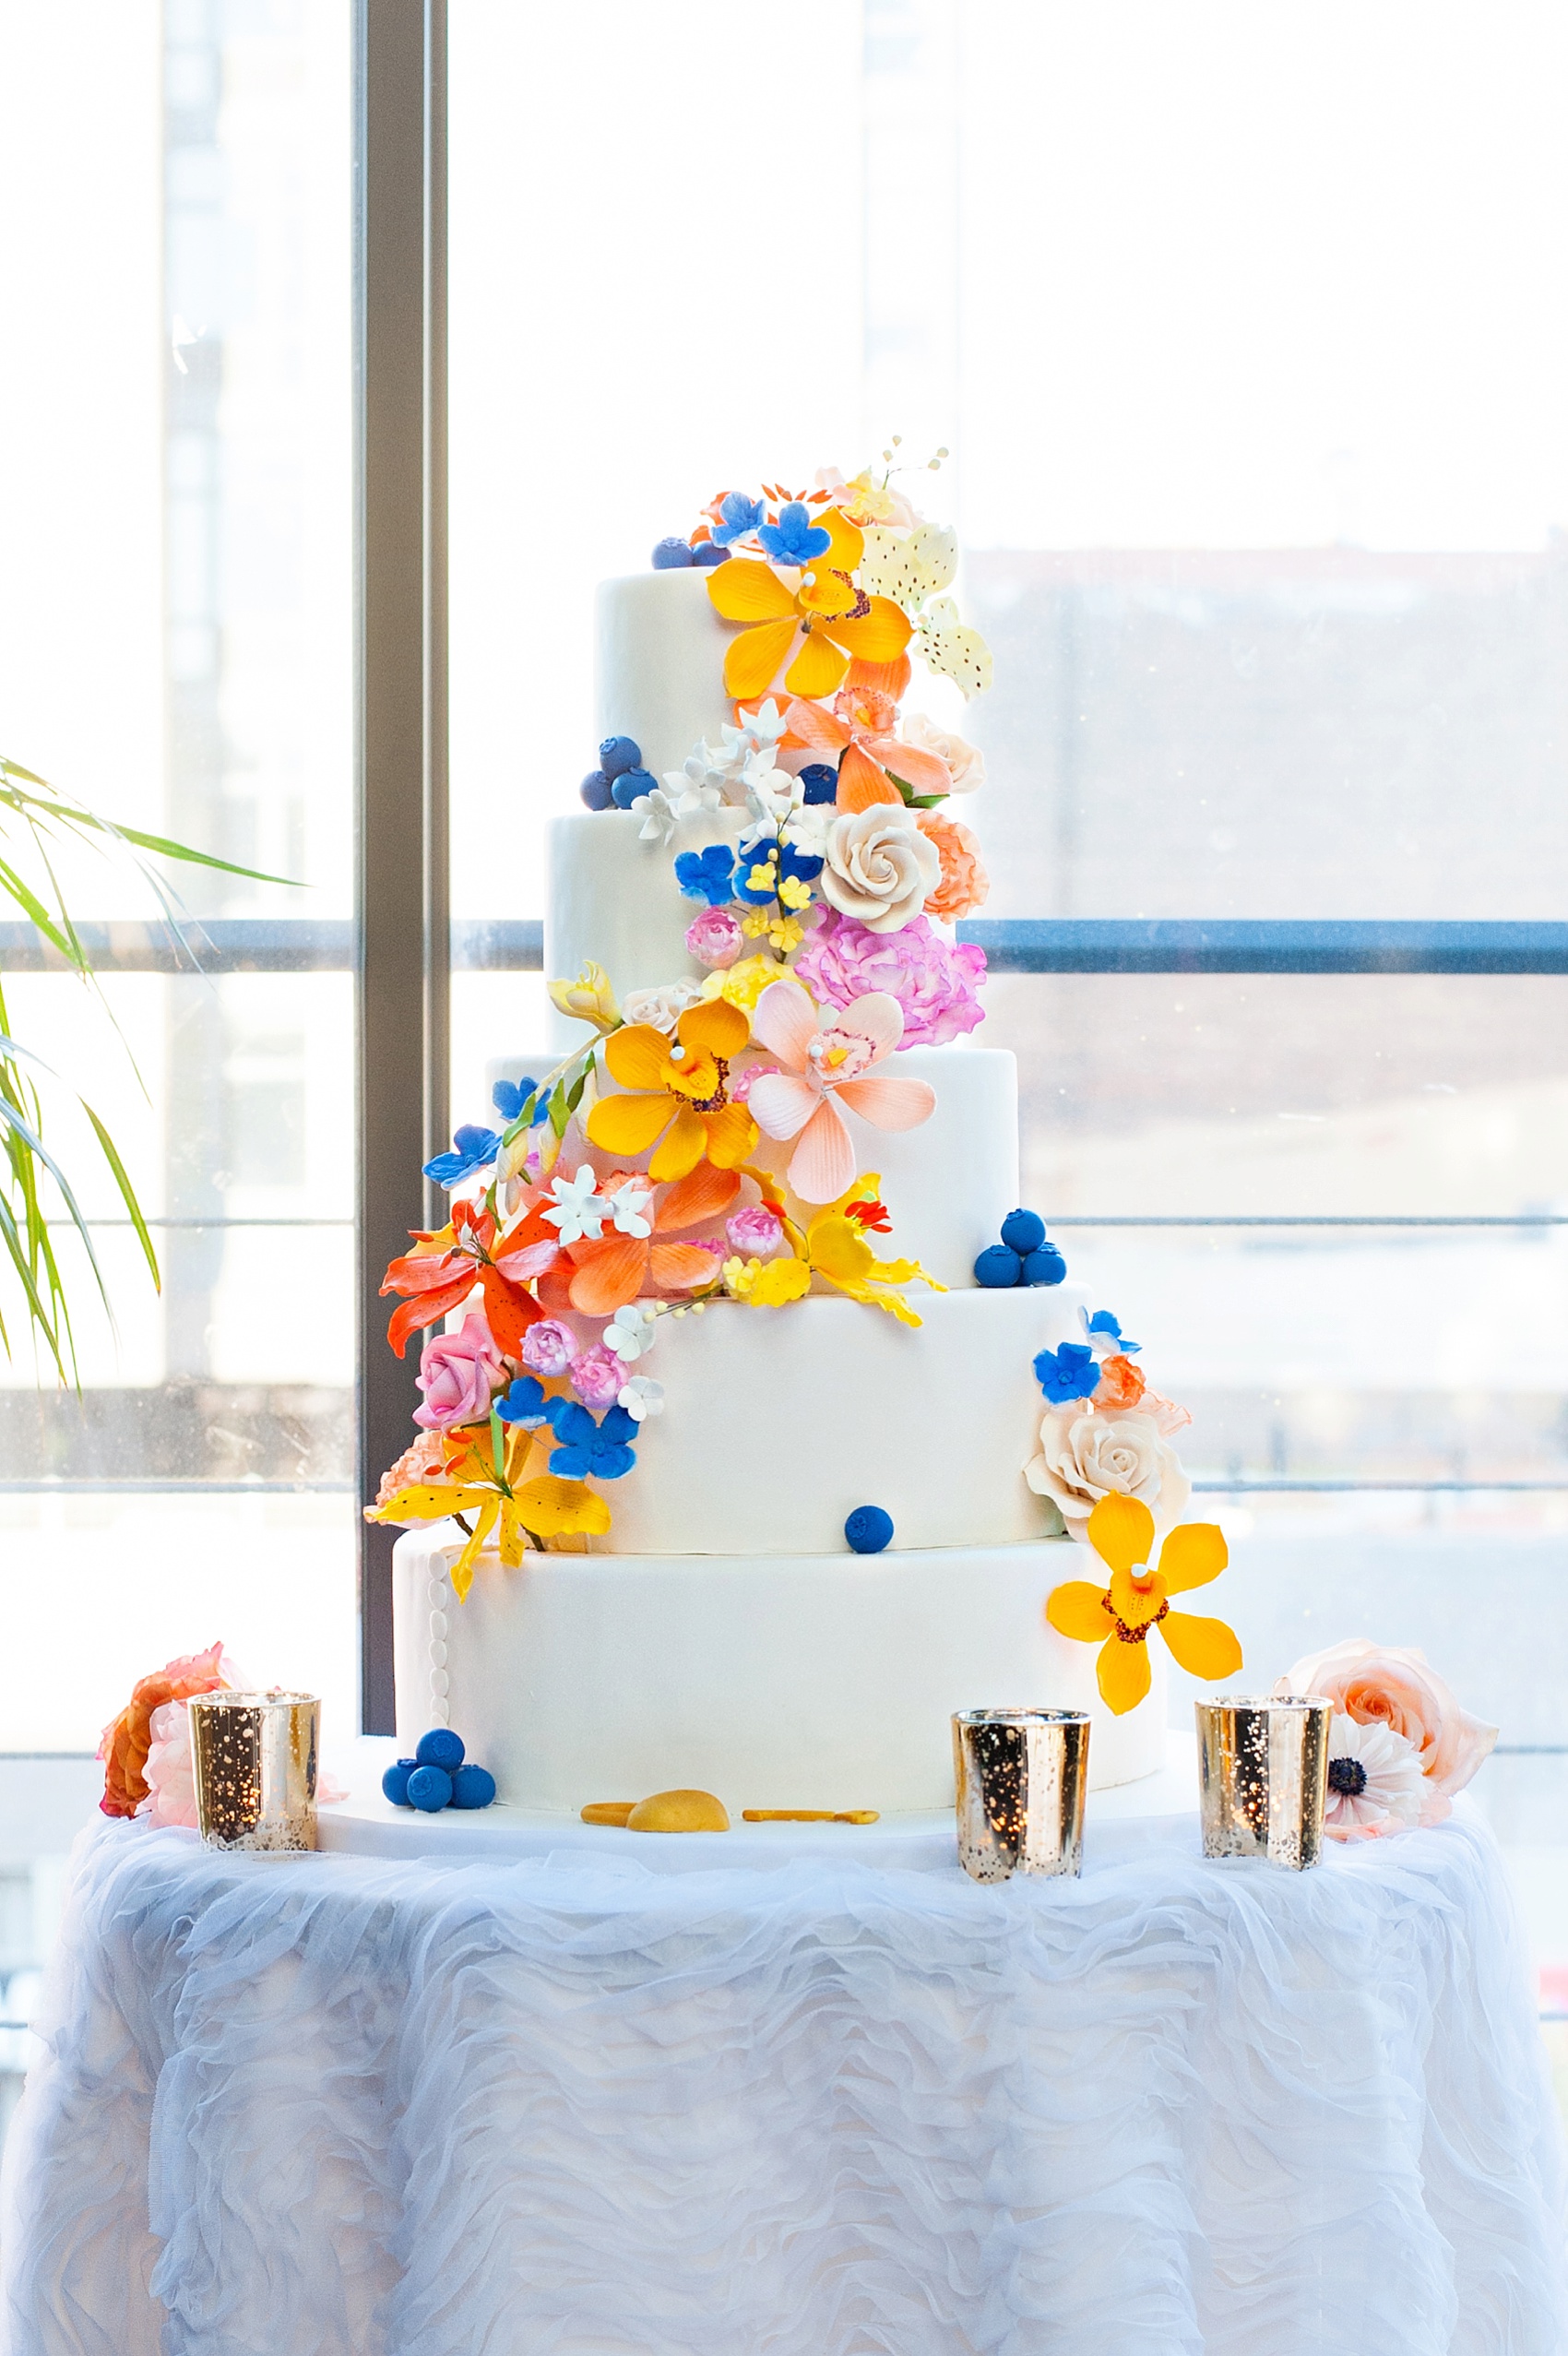 Spring cake with gumpaste cascading flowers for a Lock and Key, Forever Linked, Ponts des Art wedding inspiration. Photos by Mikkel Paige Photography, planning by Dulce Dream Events. Cake by Made in Heaven Cakes.